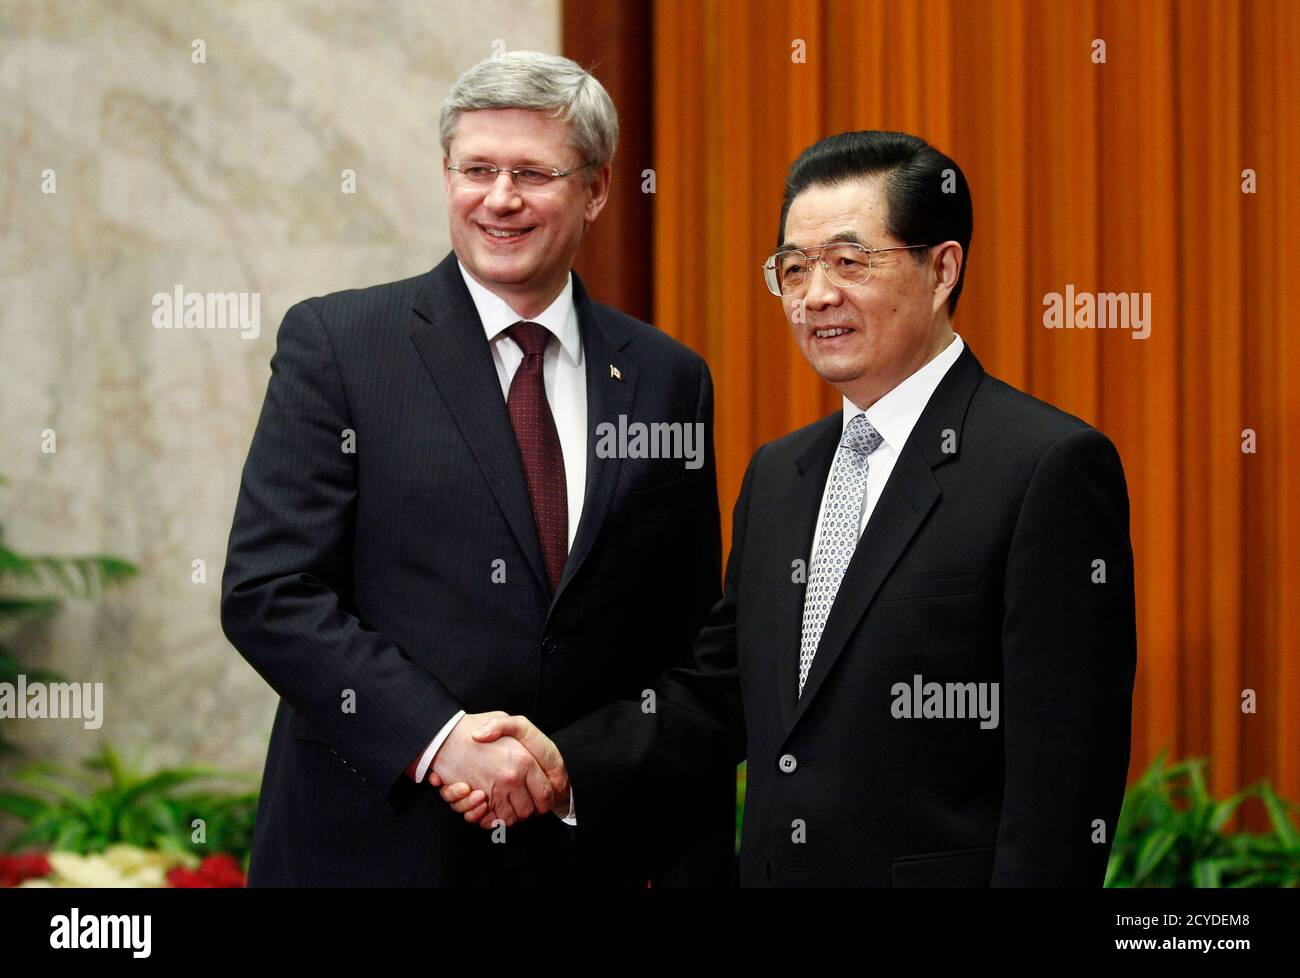 Canada's Prime Minister Stephen Harper (L) shakes hands with China's President Hu Jintao at the Great Hall of the People in Beijing February 9, 2012. China and Canada on Wednesday signed a series of deals to boost modest levels of bilateral trade and finished negotiations on a foreign investment protection pact after 18 years of talks.      REUTERS/Chris Wattie       (CHINA - Tags: POLITICS) Stock Photo